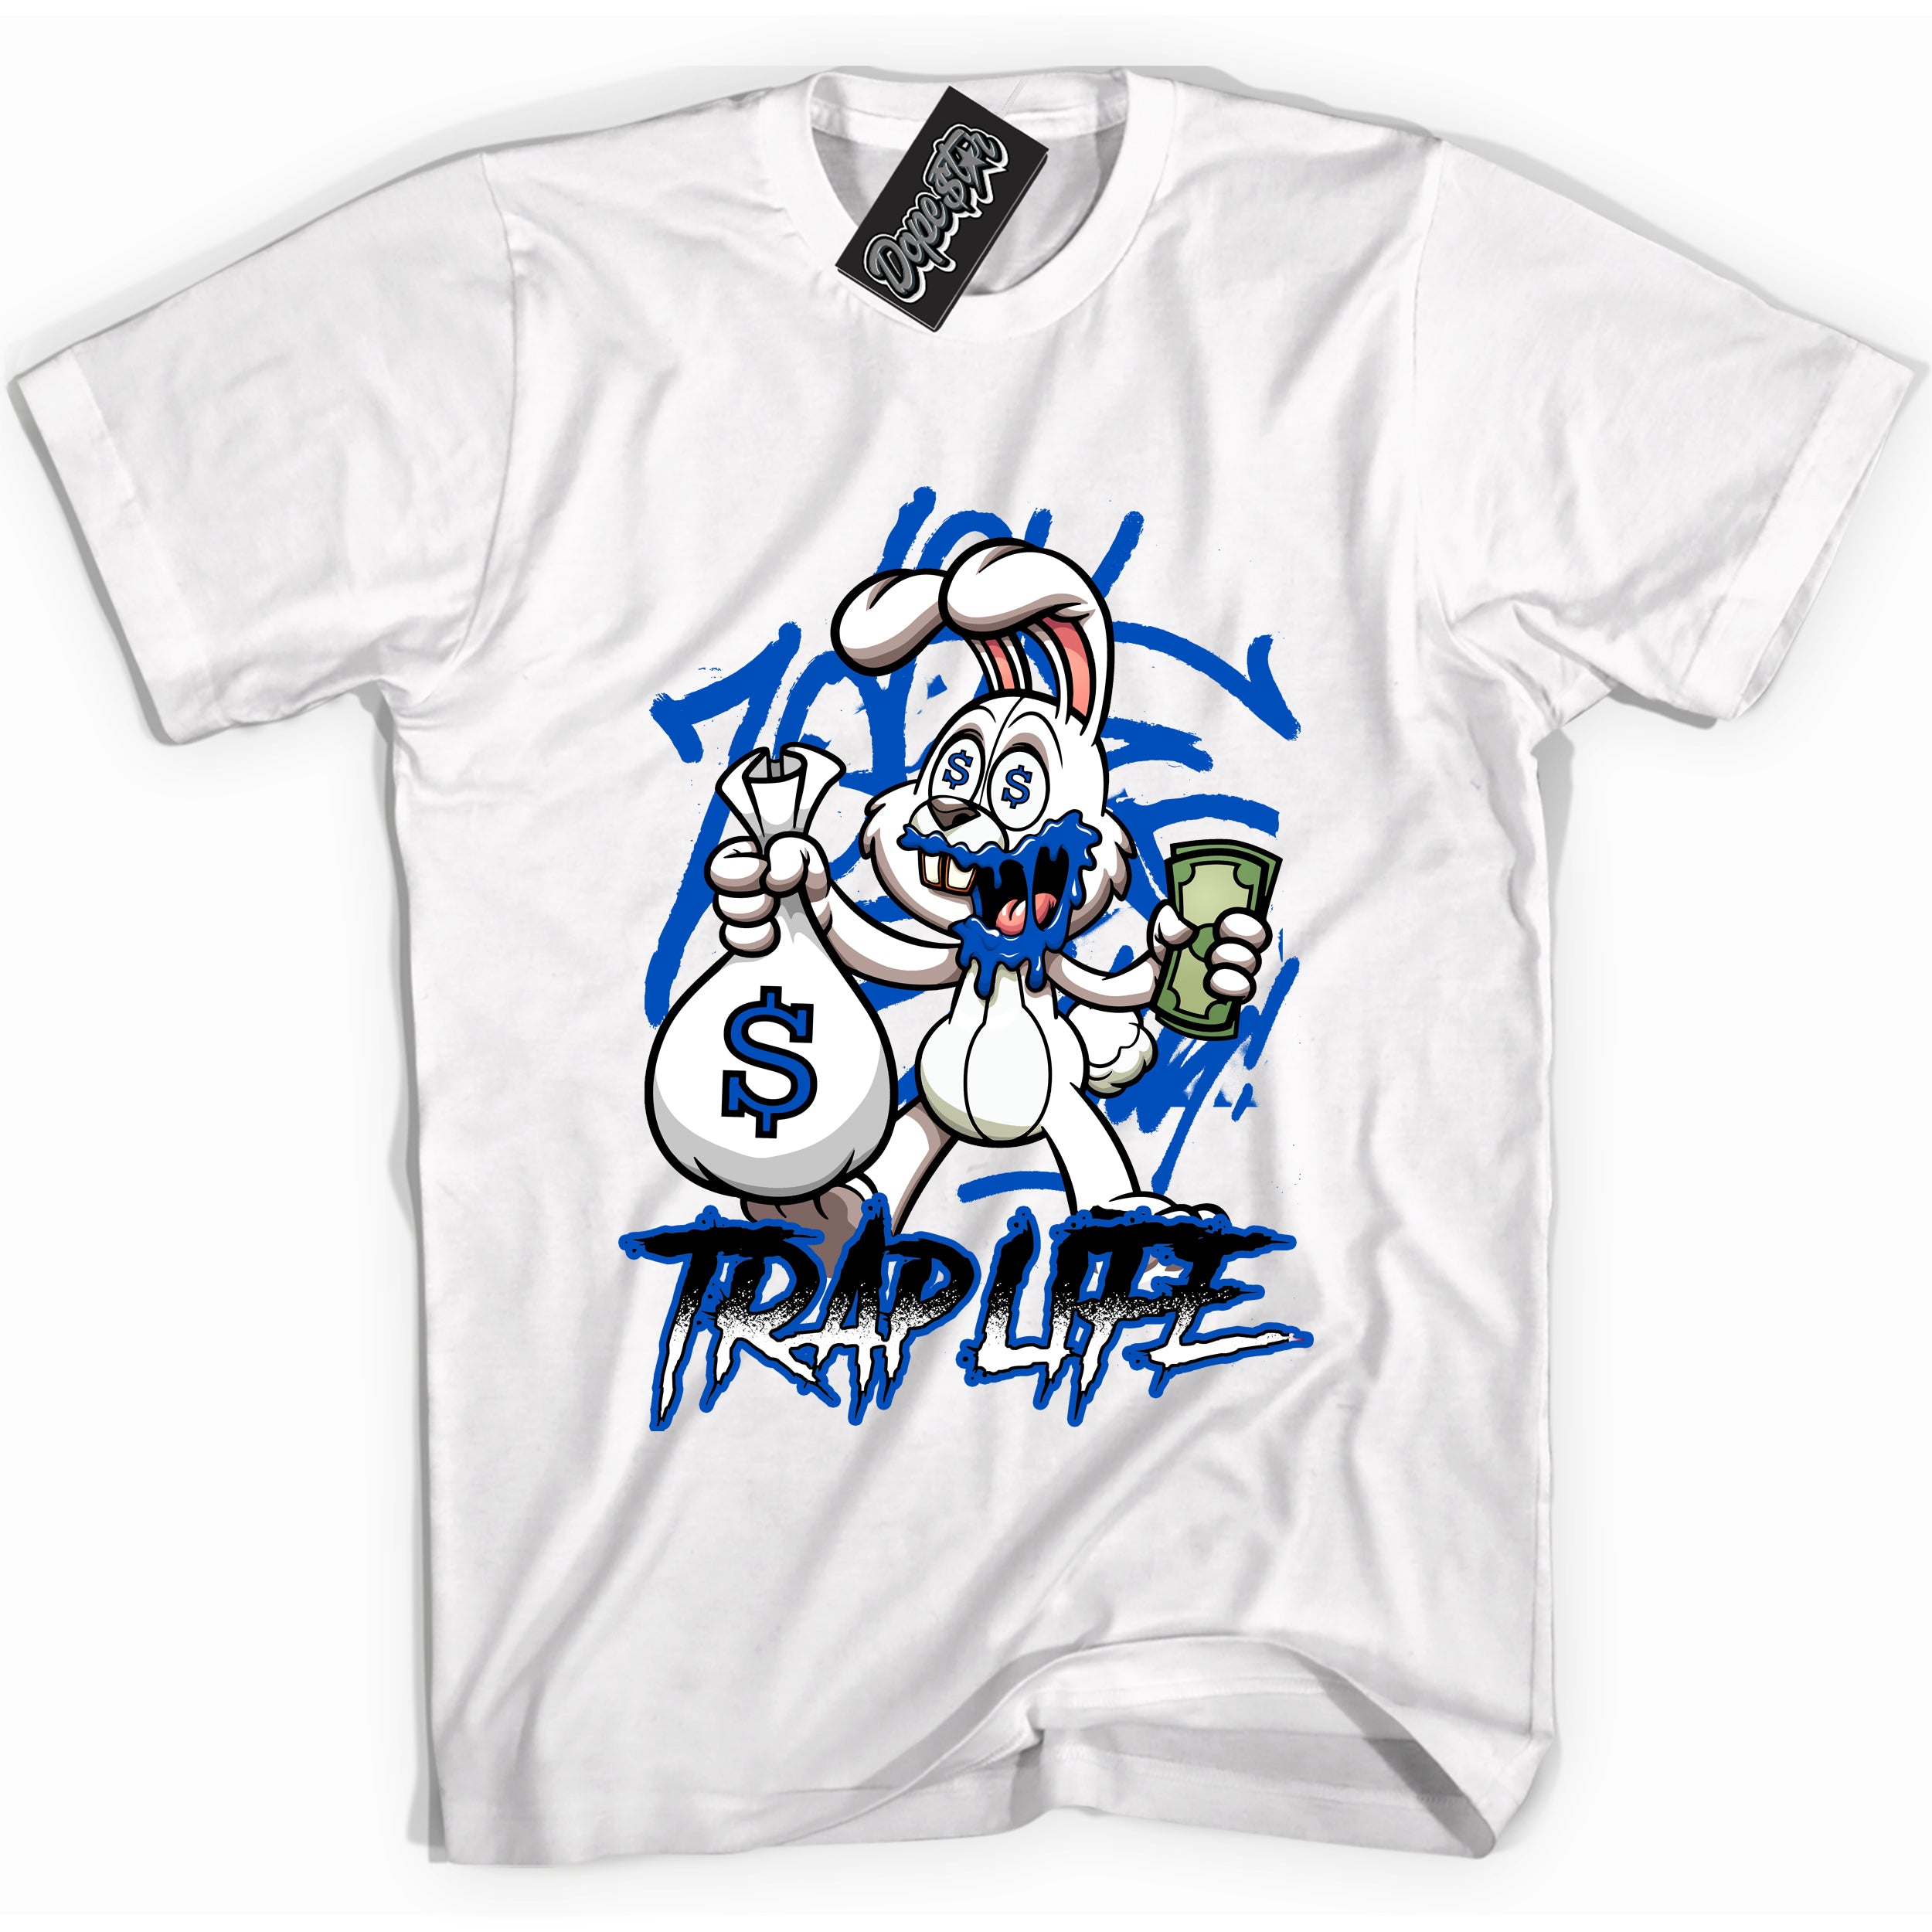 Cool White graphic tee with "Trap Rabbit" design, that perfectly matches Royal Reimagined 1s sneakers 